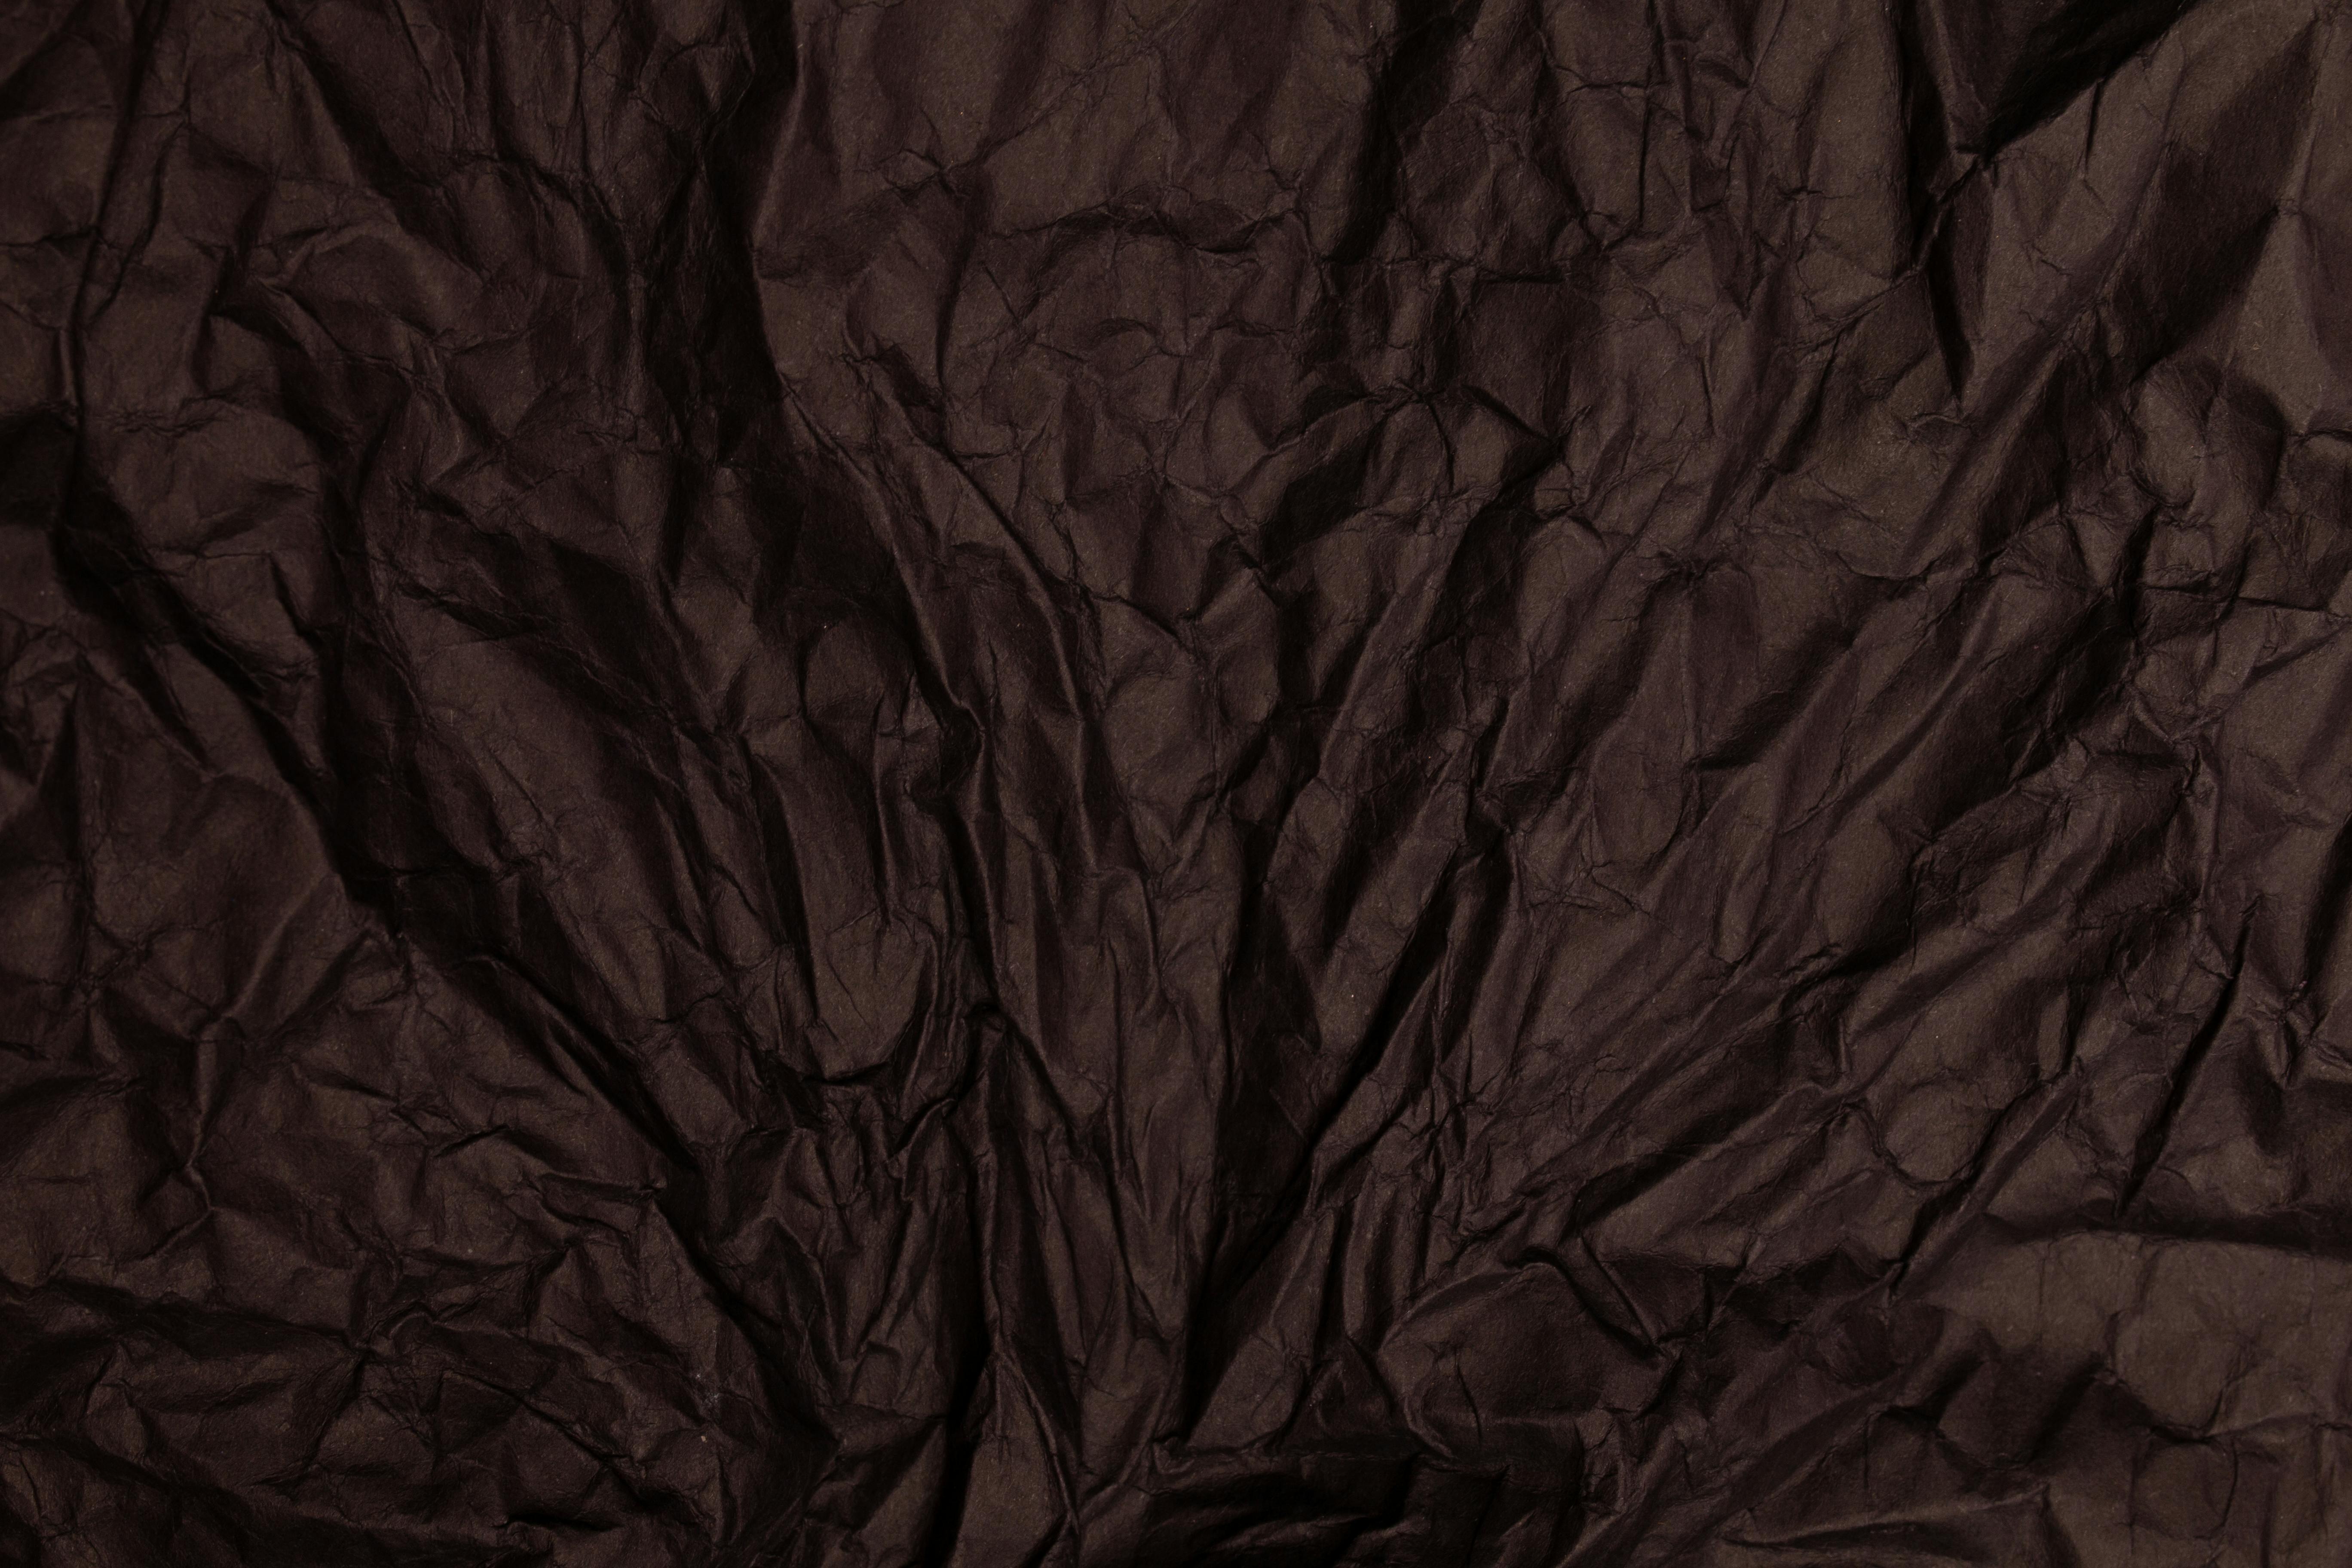 Crumpled Brown Paper Texture Picture, Free Photograph